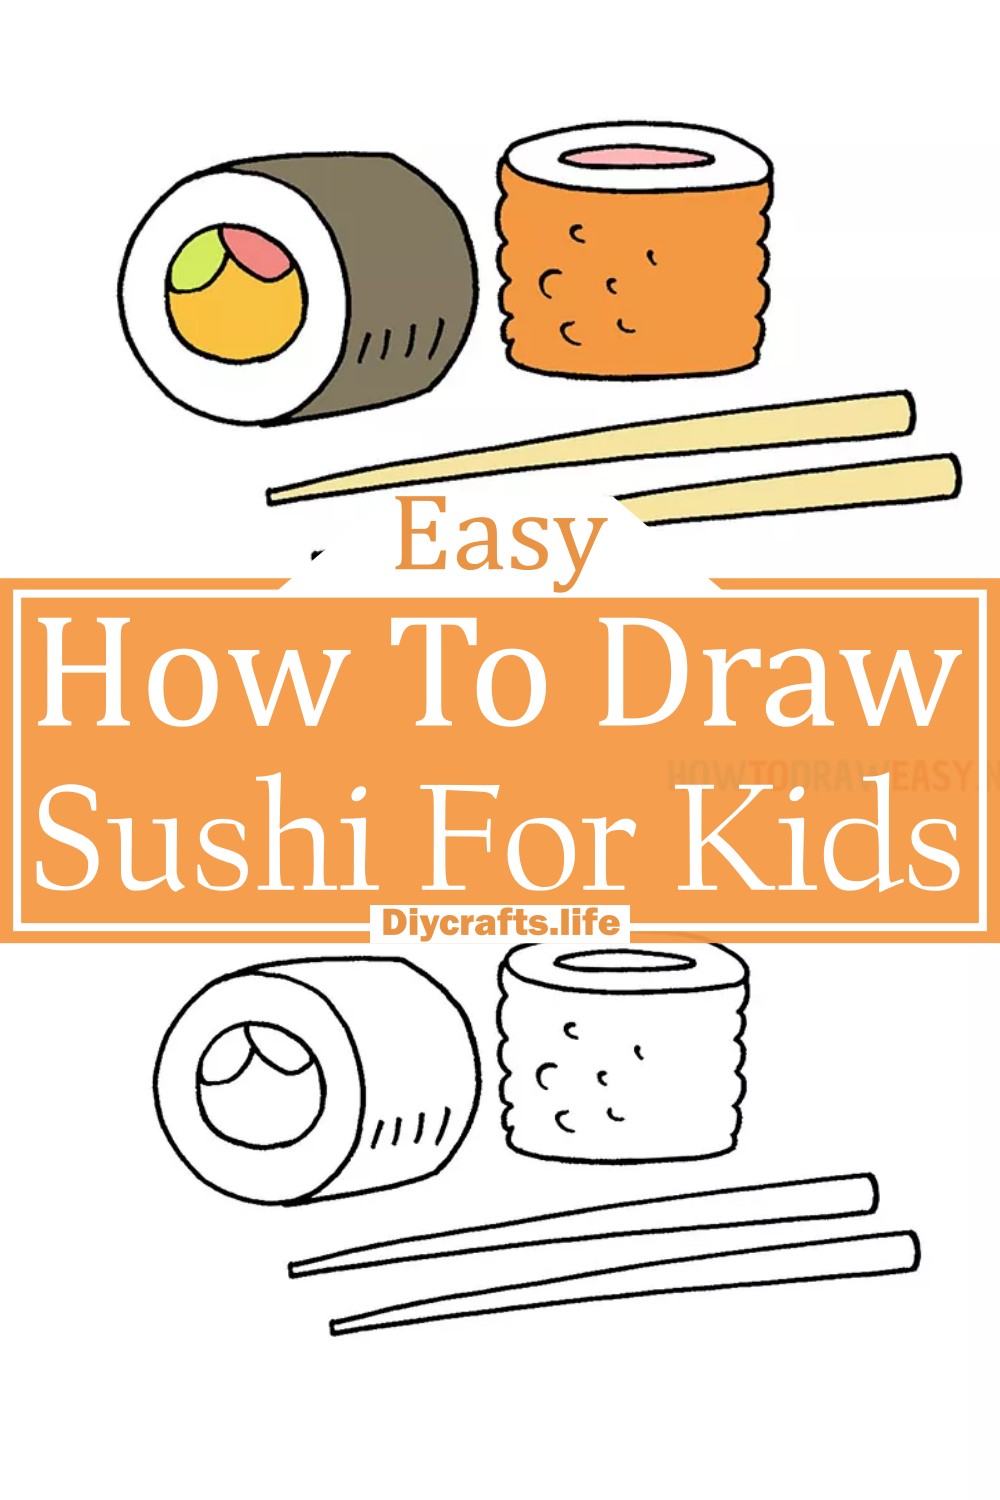 How To Draw Sushi For Kids